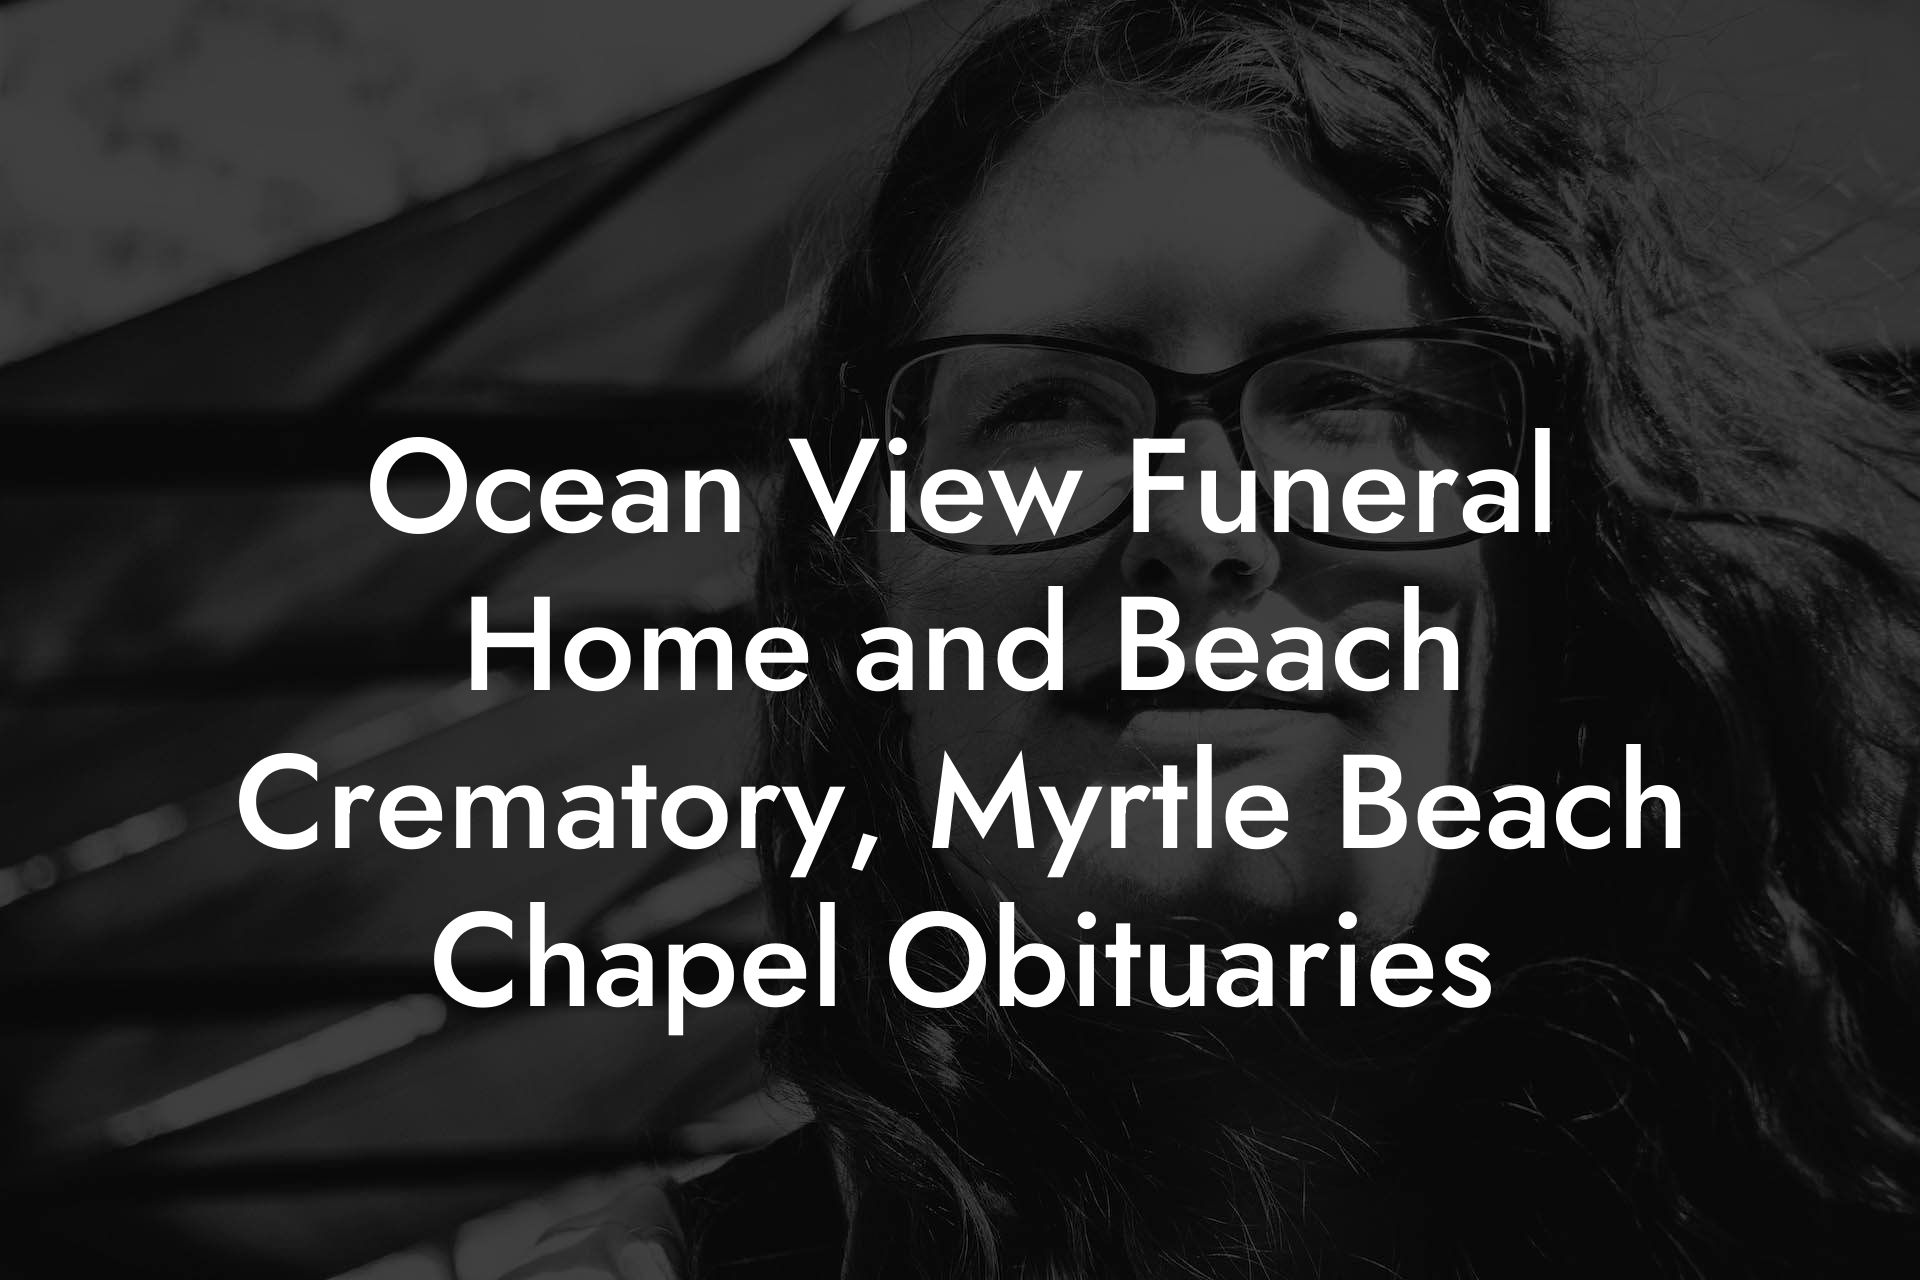 Ocean View Funeral Home and Beach Crematory, Myrtle Beach Chapel Obituaries